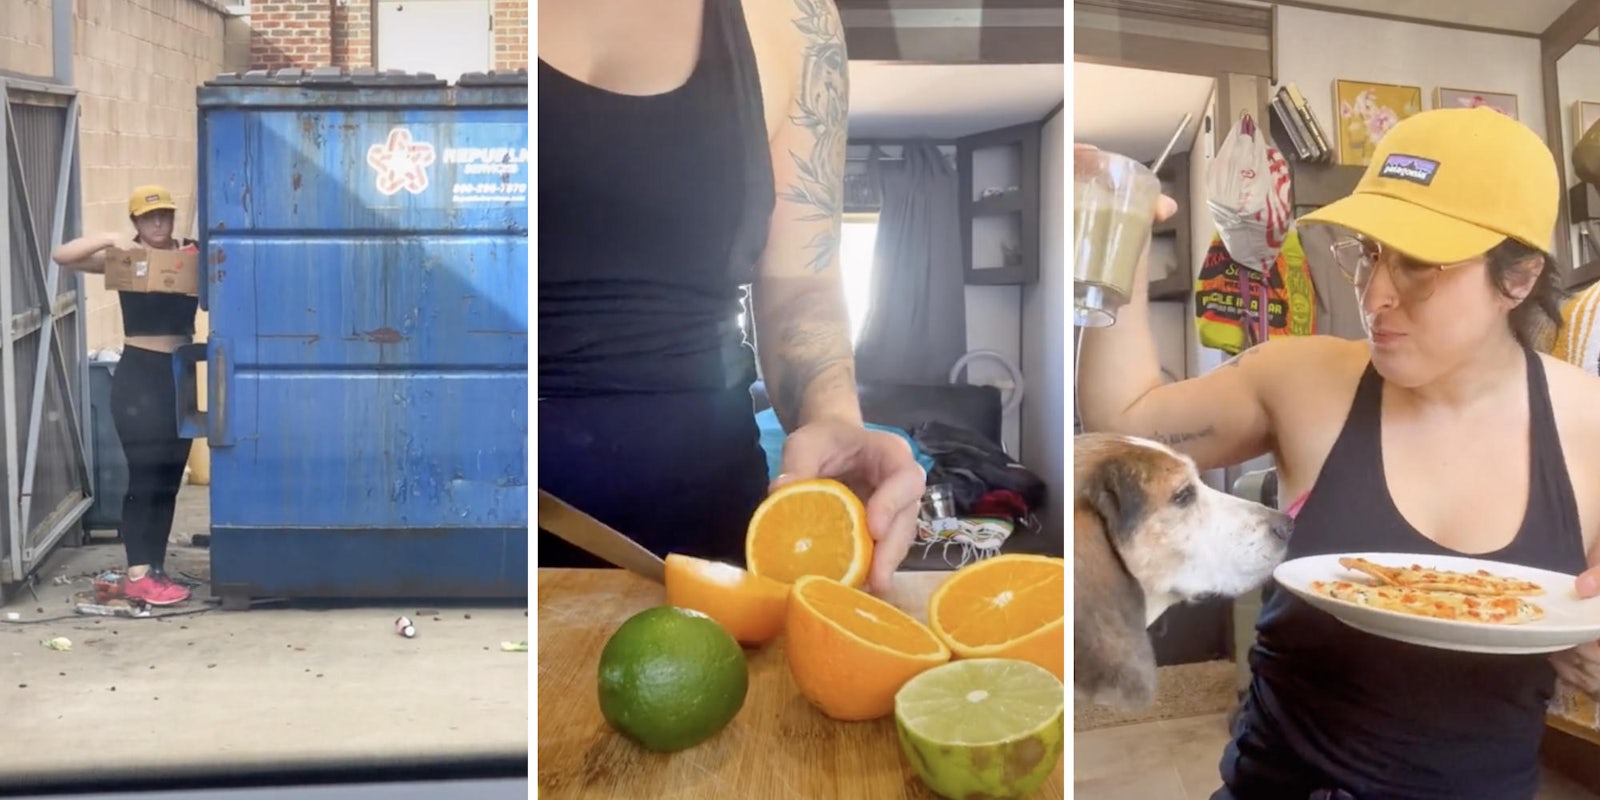 woman dumpster diving (l) cutting up oranges (m) woman eating pizza with her dog (r)